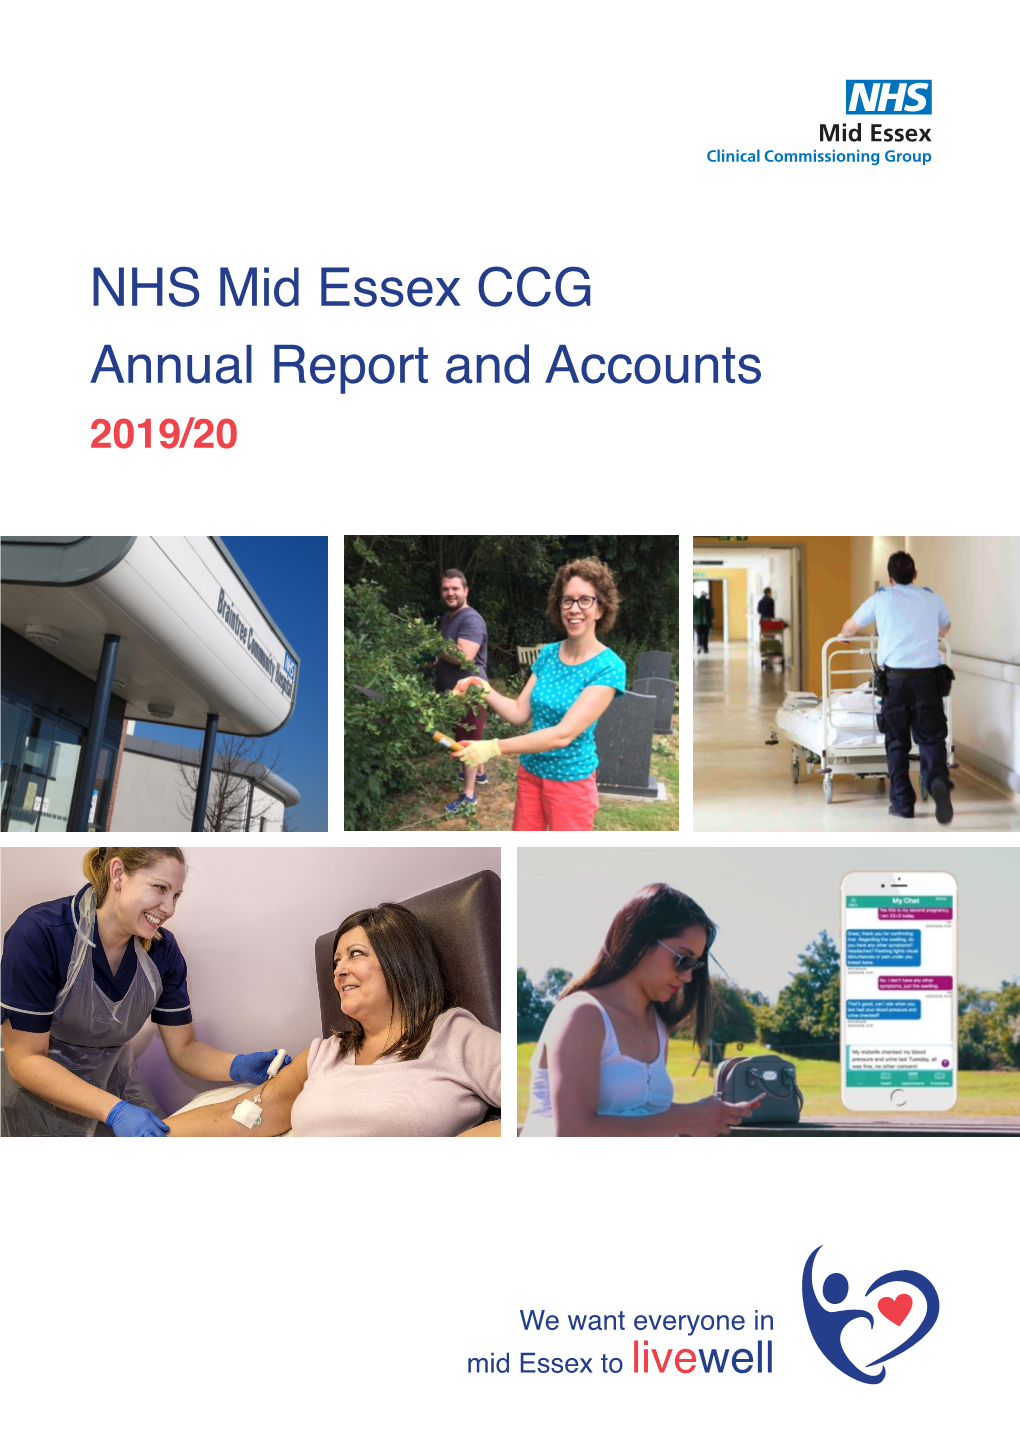 NHS Mid Essex CCG Annual Report and Accounts 2019/20